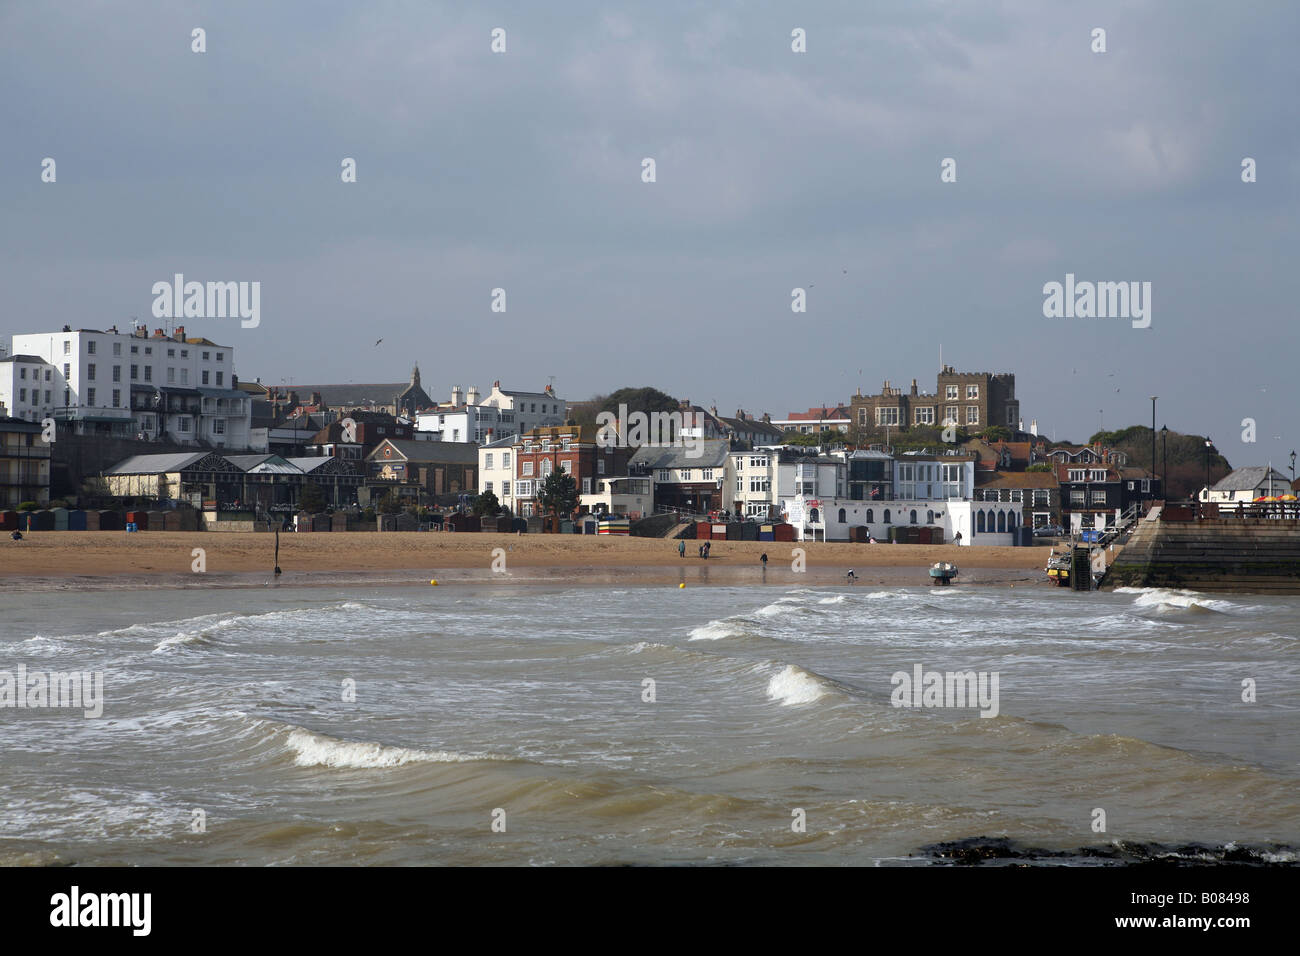 Pic By Paul Grover Pic Shows Viking Bay in Broadstairs on the Kent Coast Stock Photo